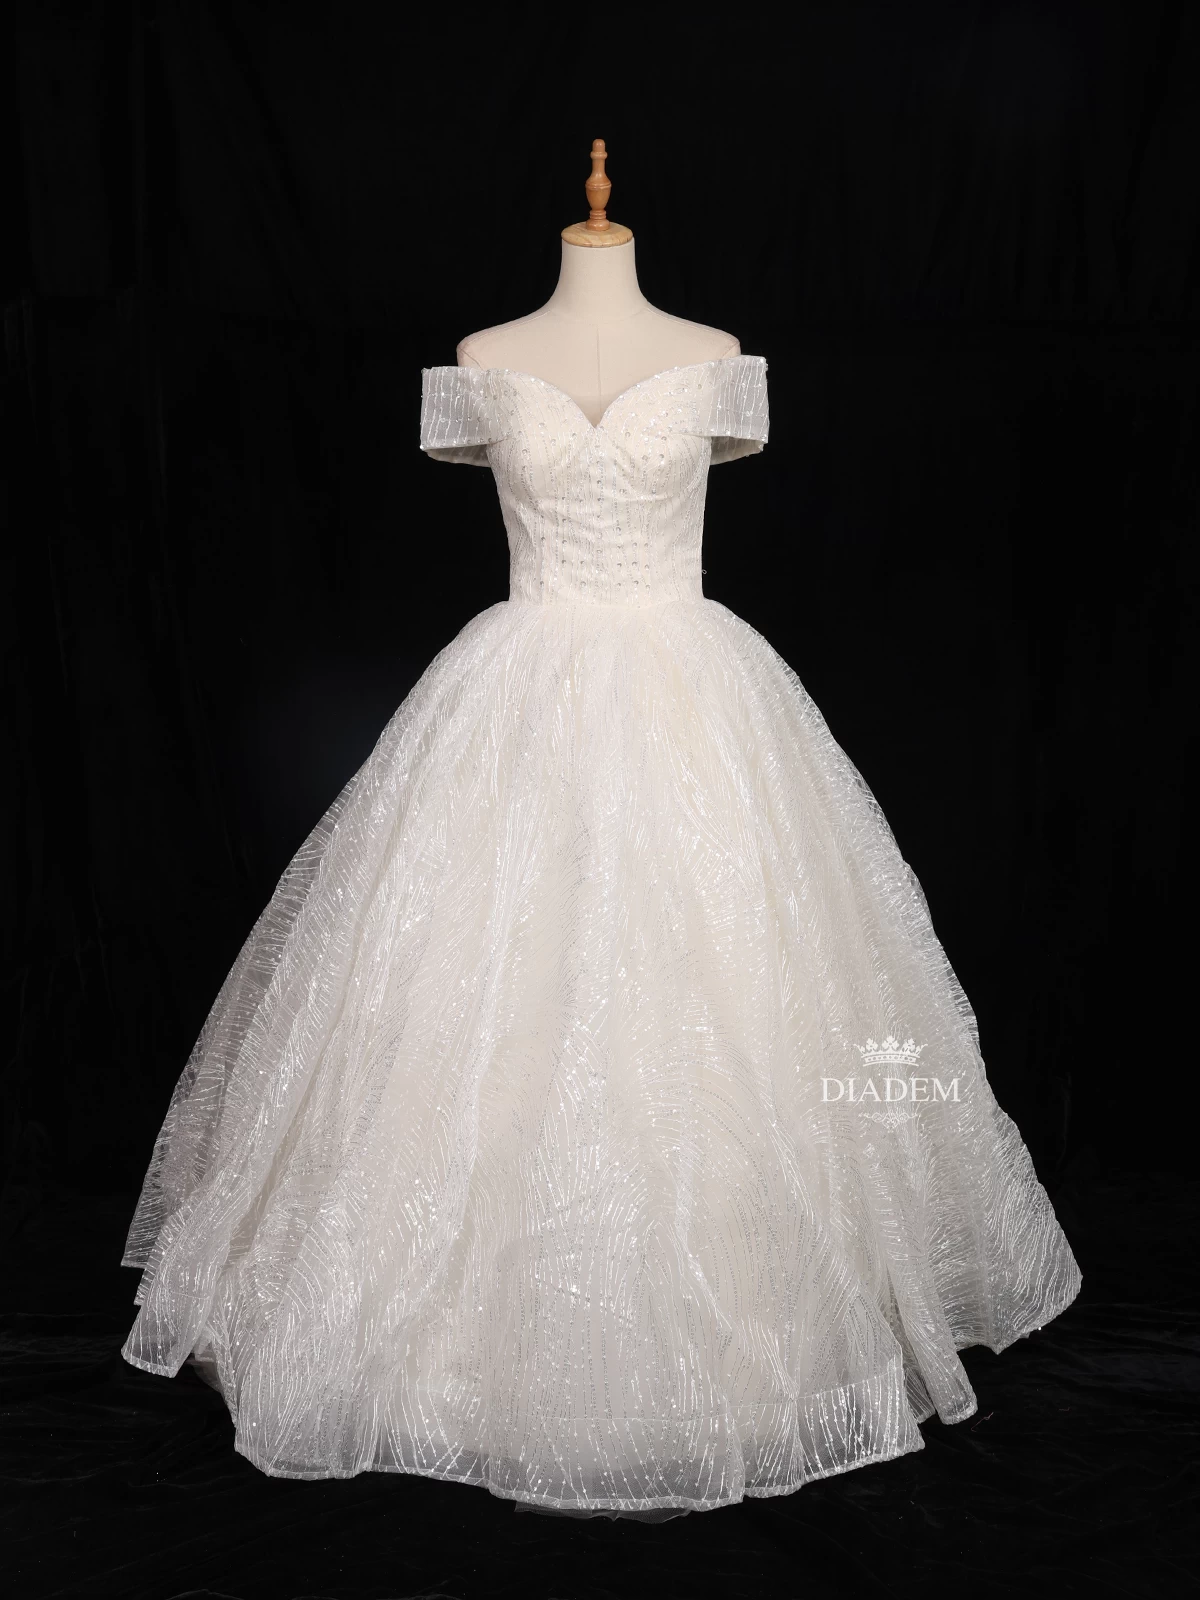 White Net Off-Shoulder Ball Gown Embellished with Floral Threadwork and Sequins